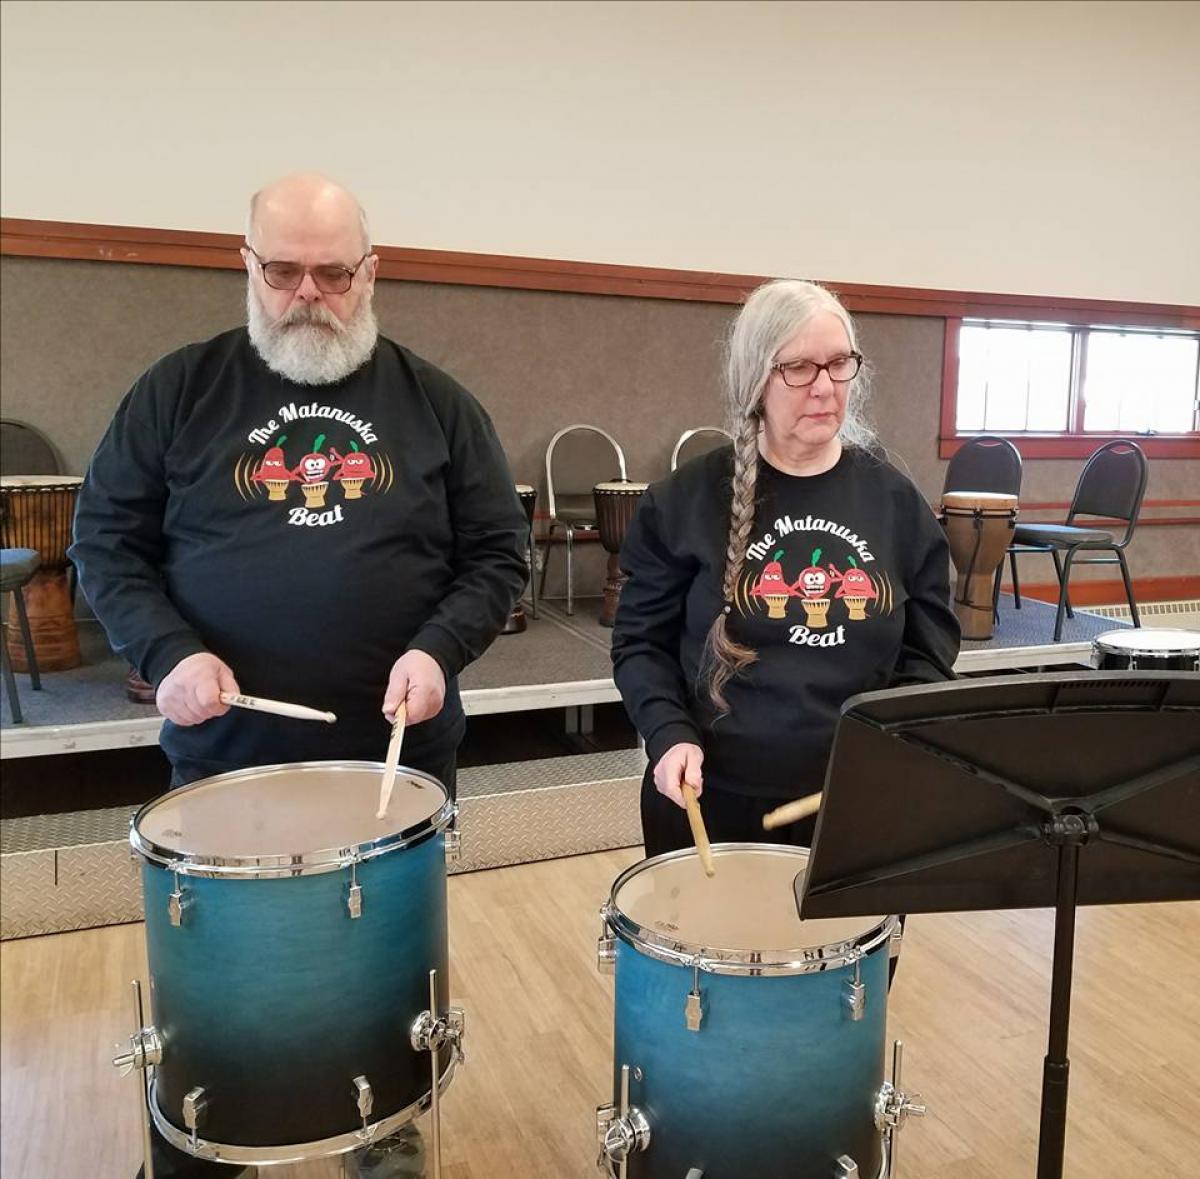 A man and a woman playing drums